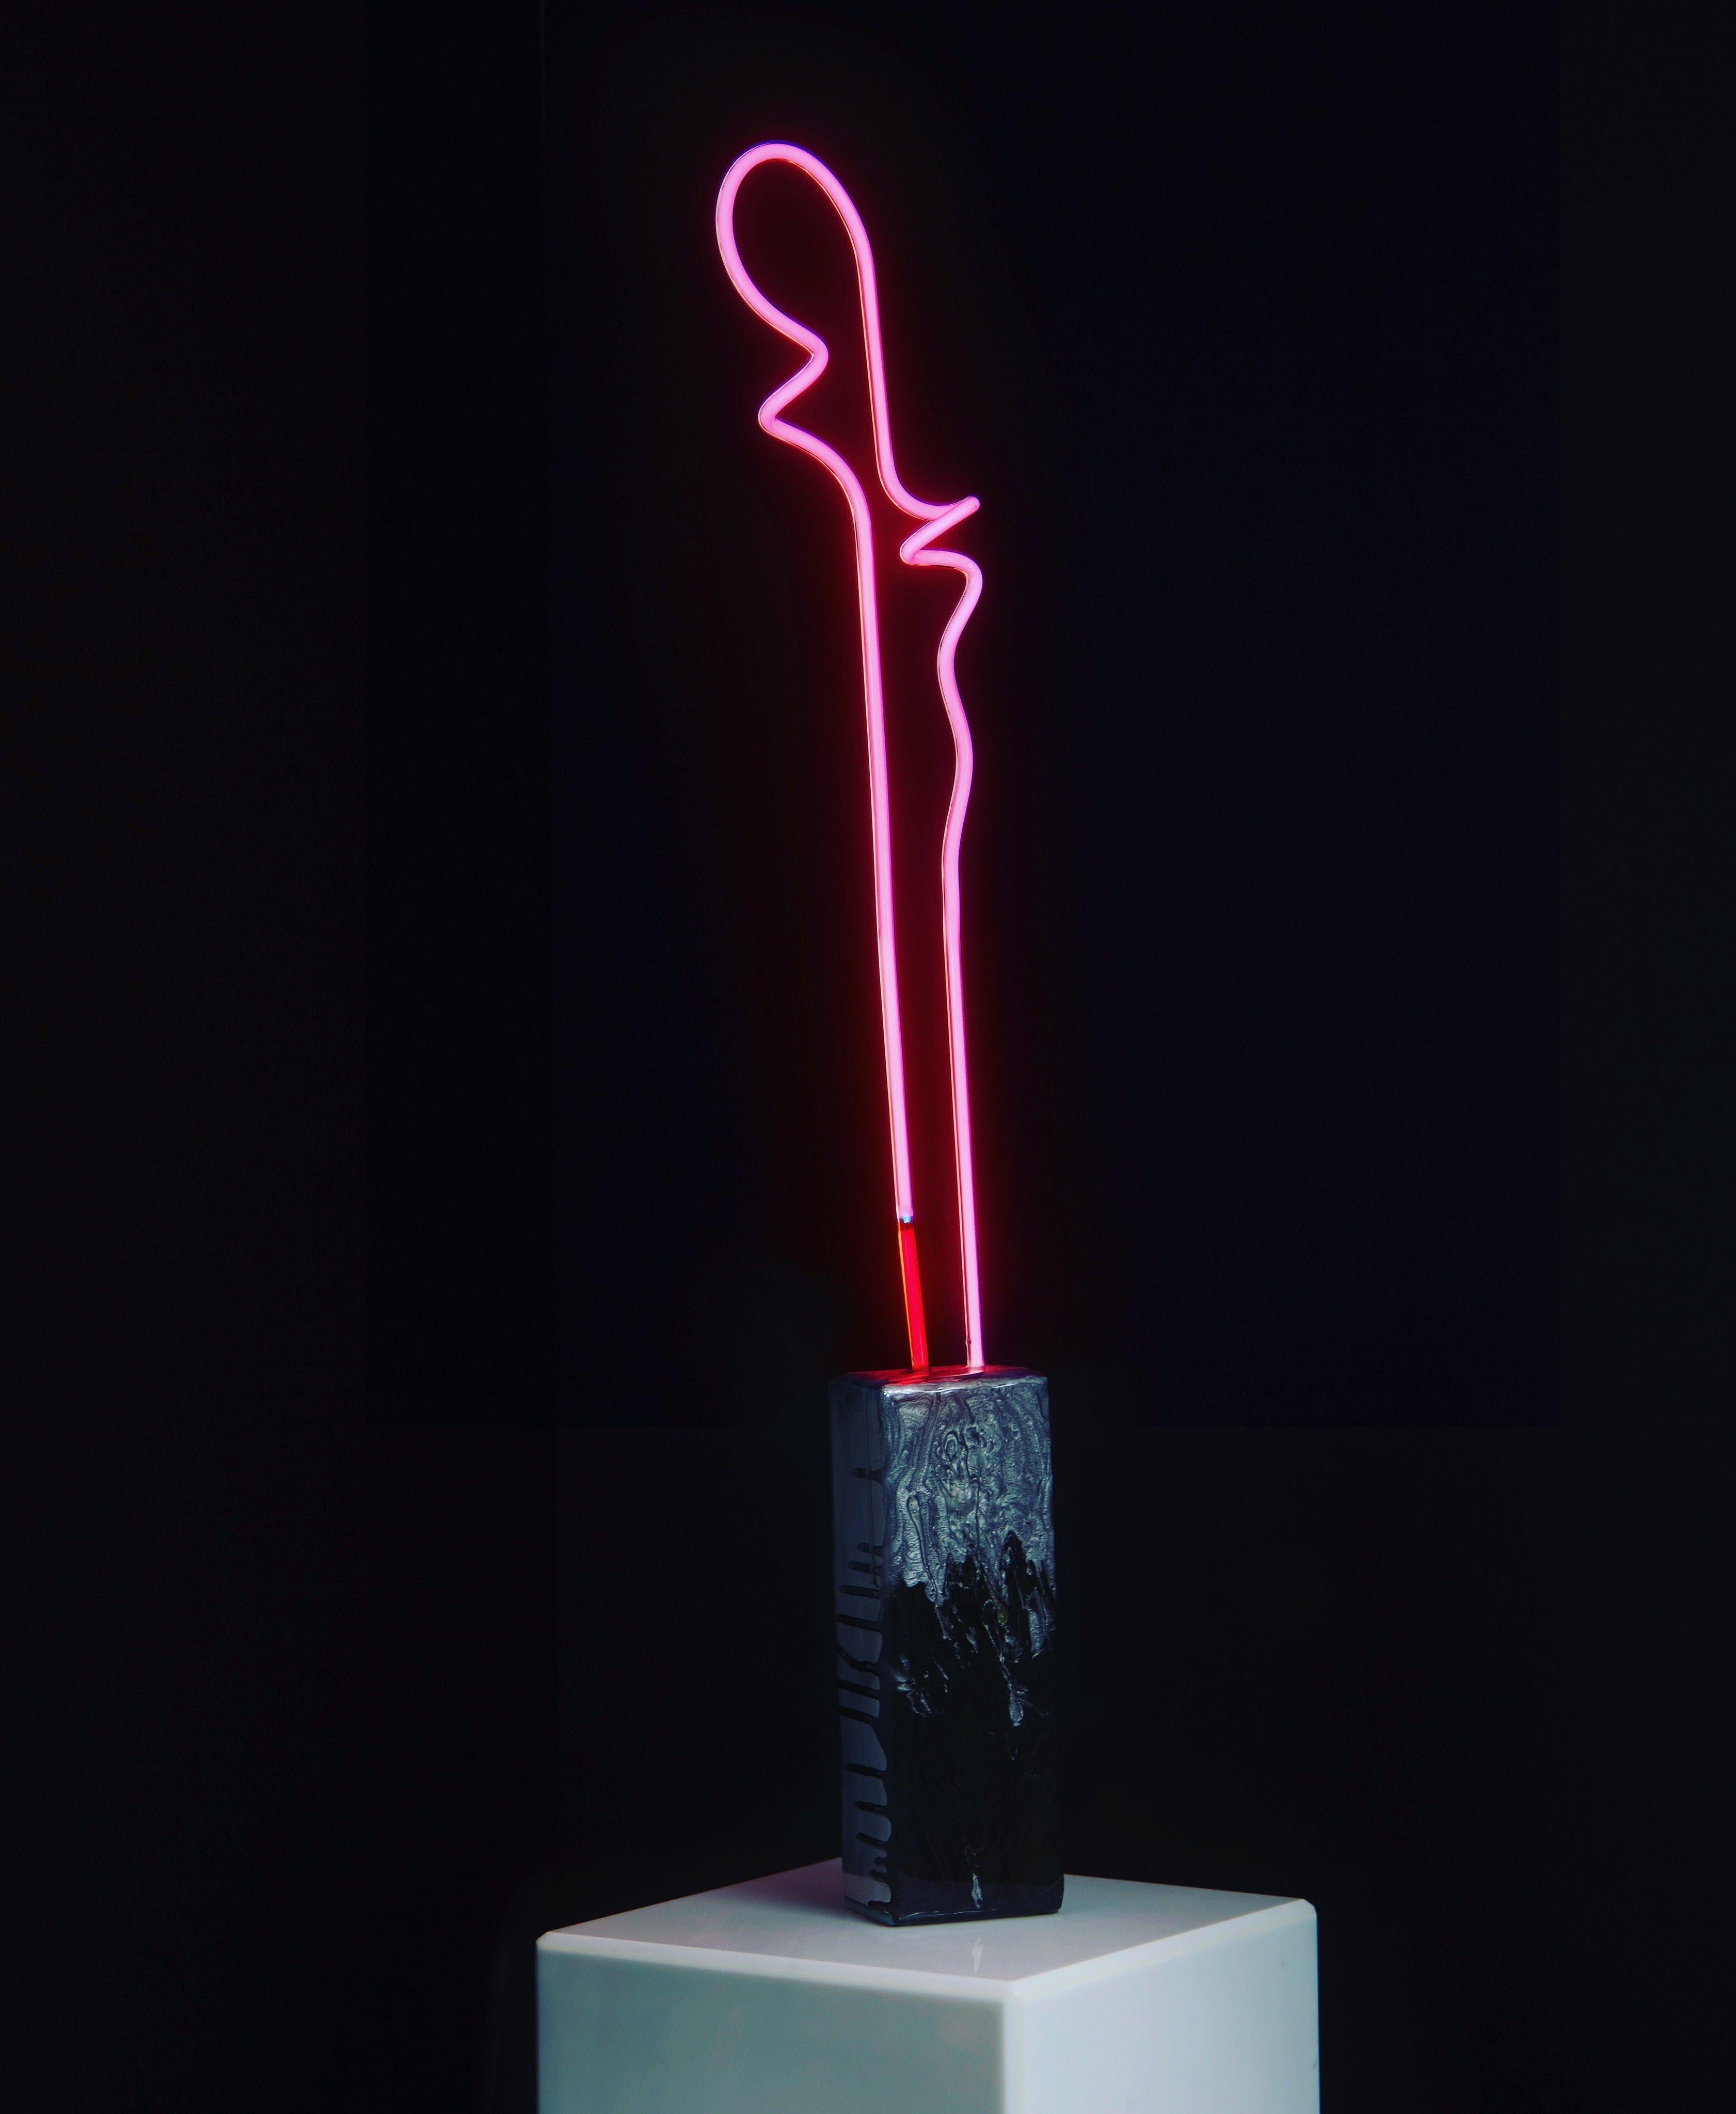 This glass neon table lamp is hand bent neon glass from Italy. One of a kind light sculpture in hot pink with 4” of ruby red- set with pigmented resin in an aluminium base. Transformer is attached so it simply plugs in. All my neon light sculptures